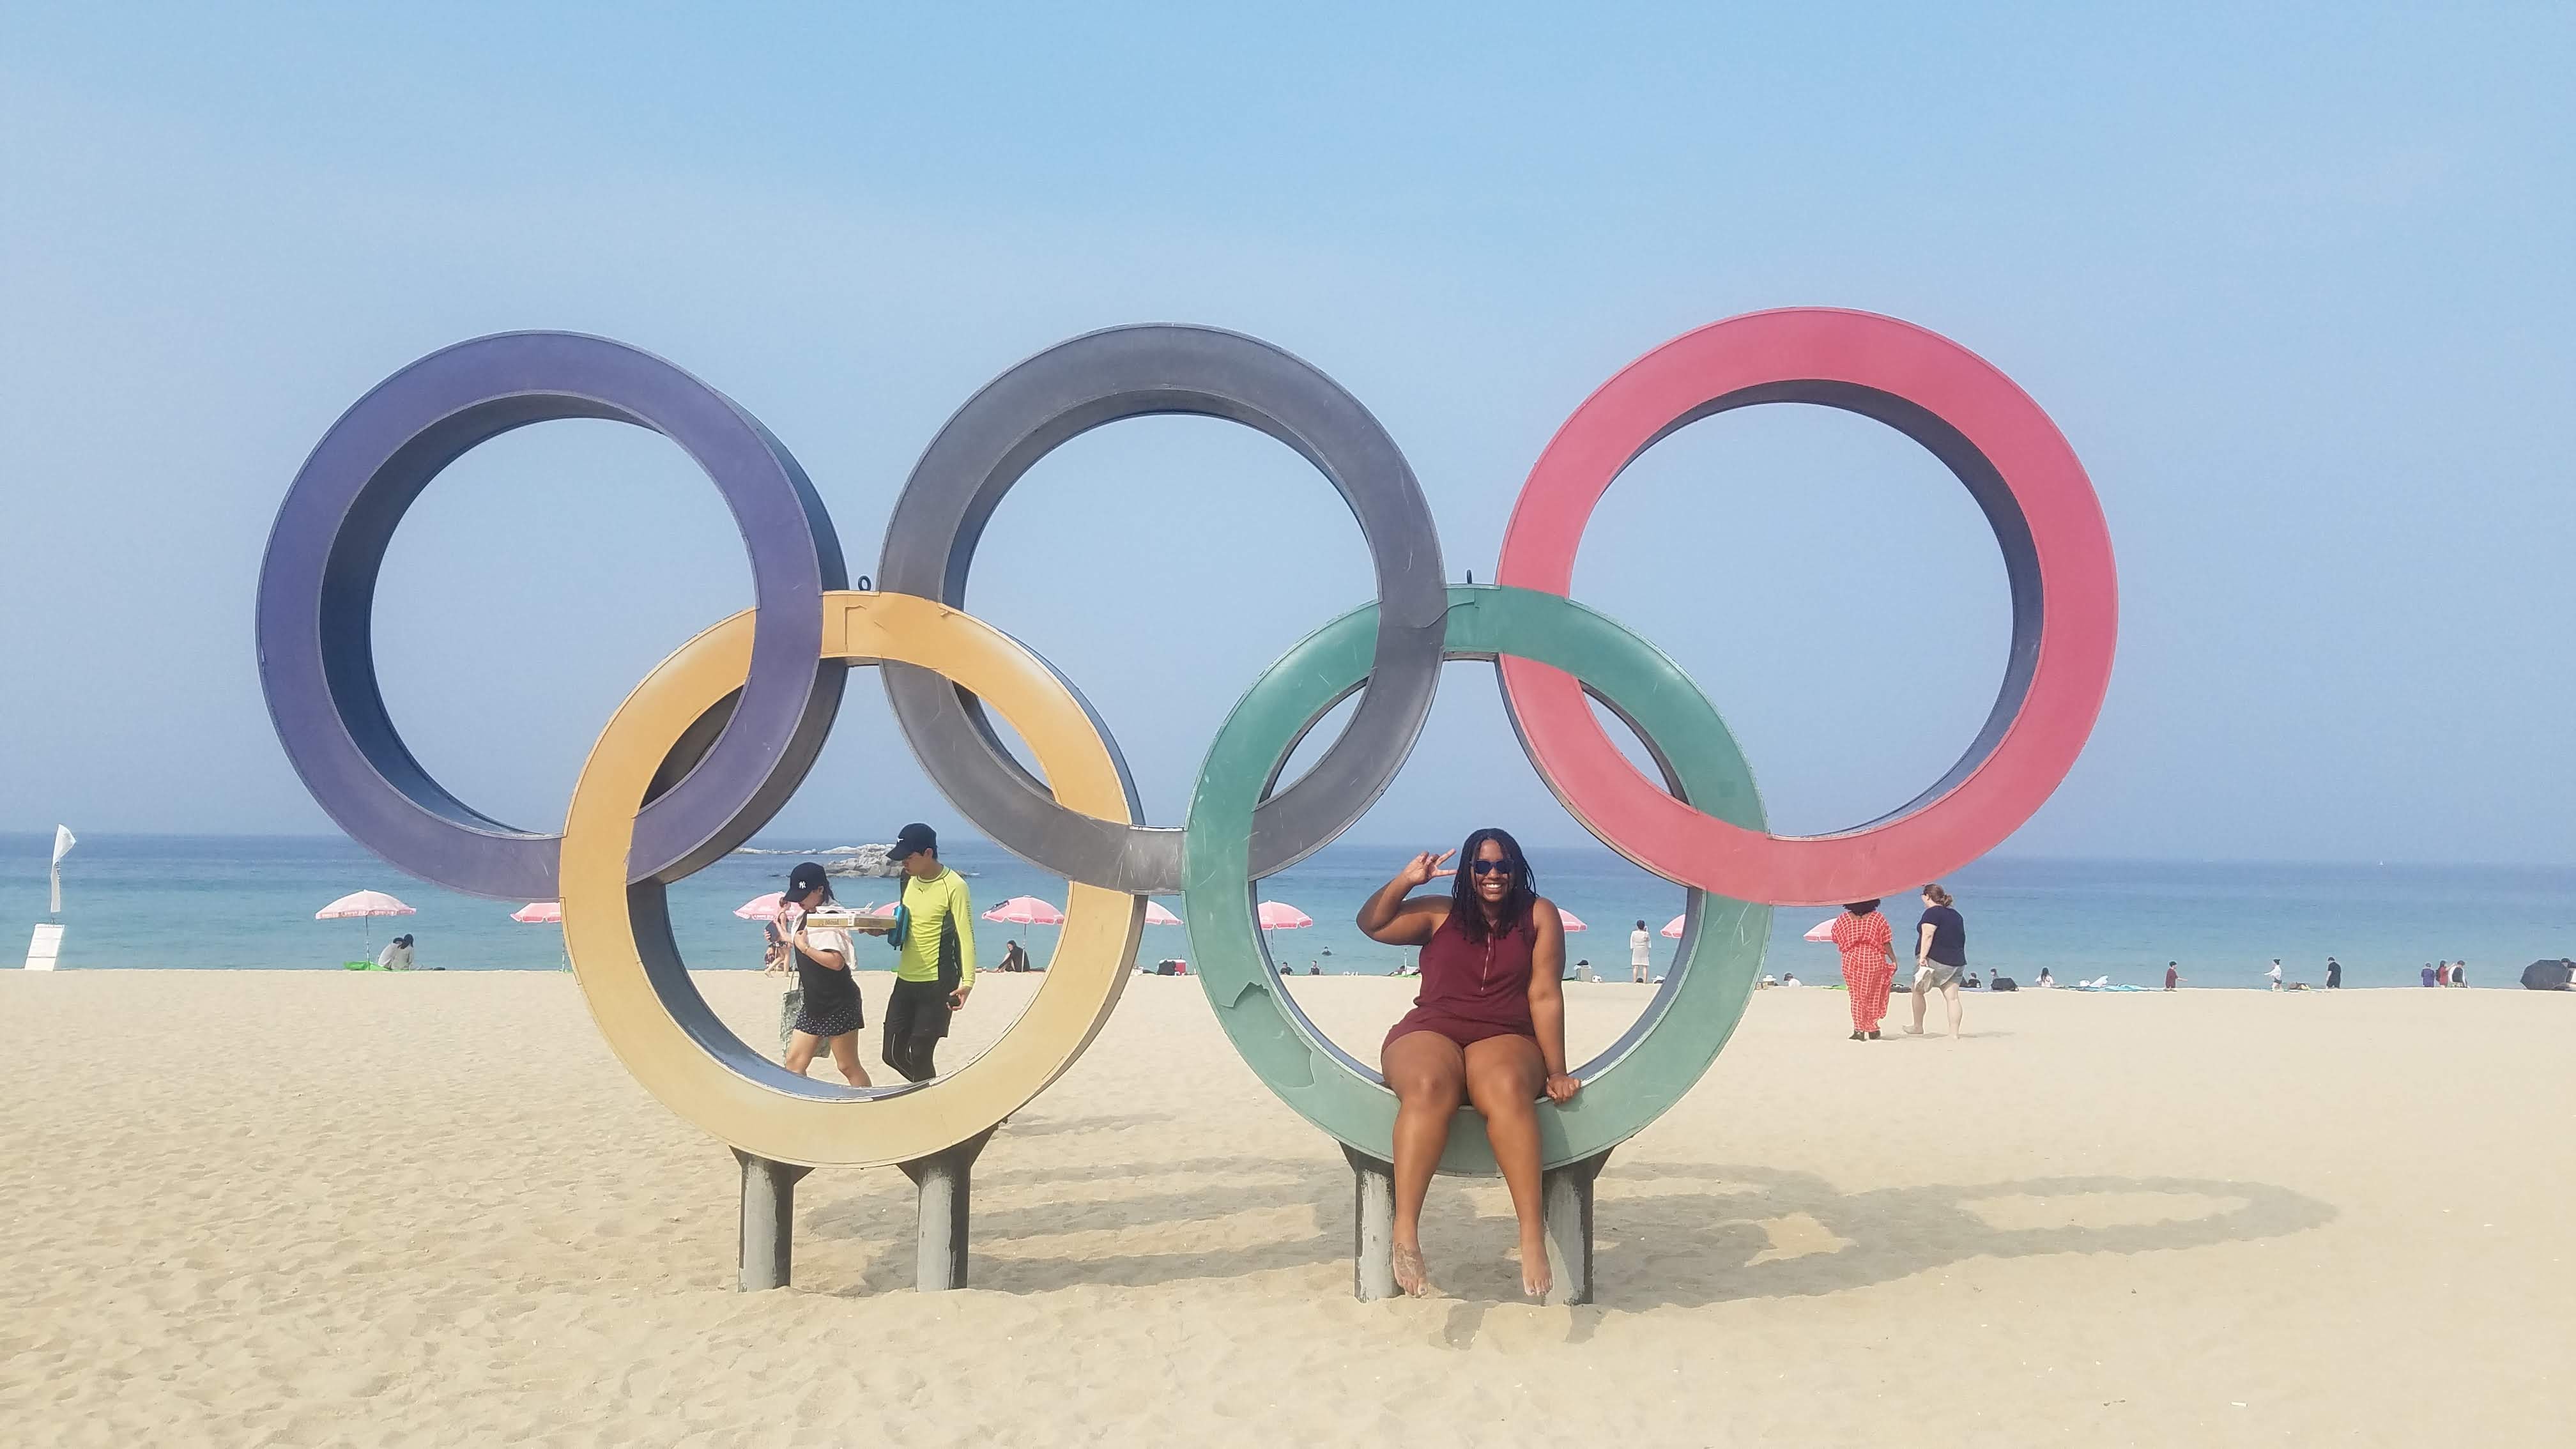 Student Mikayla Jones takes a photo with the Olympic rings in South Korea.